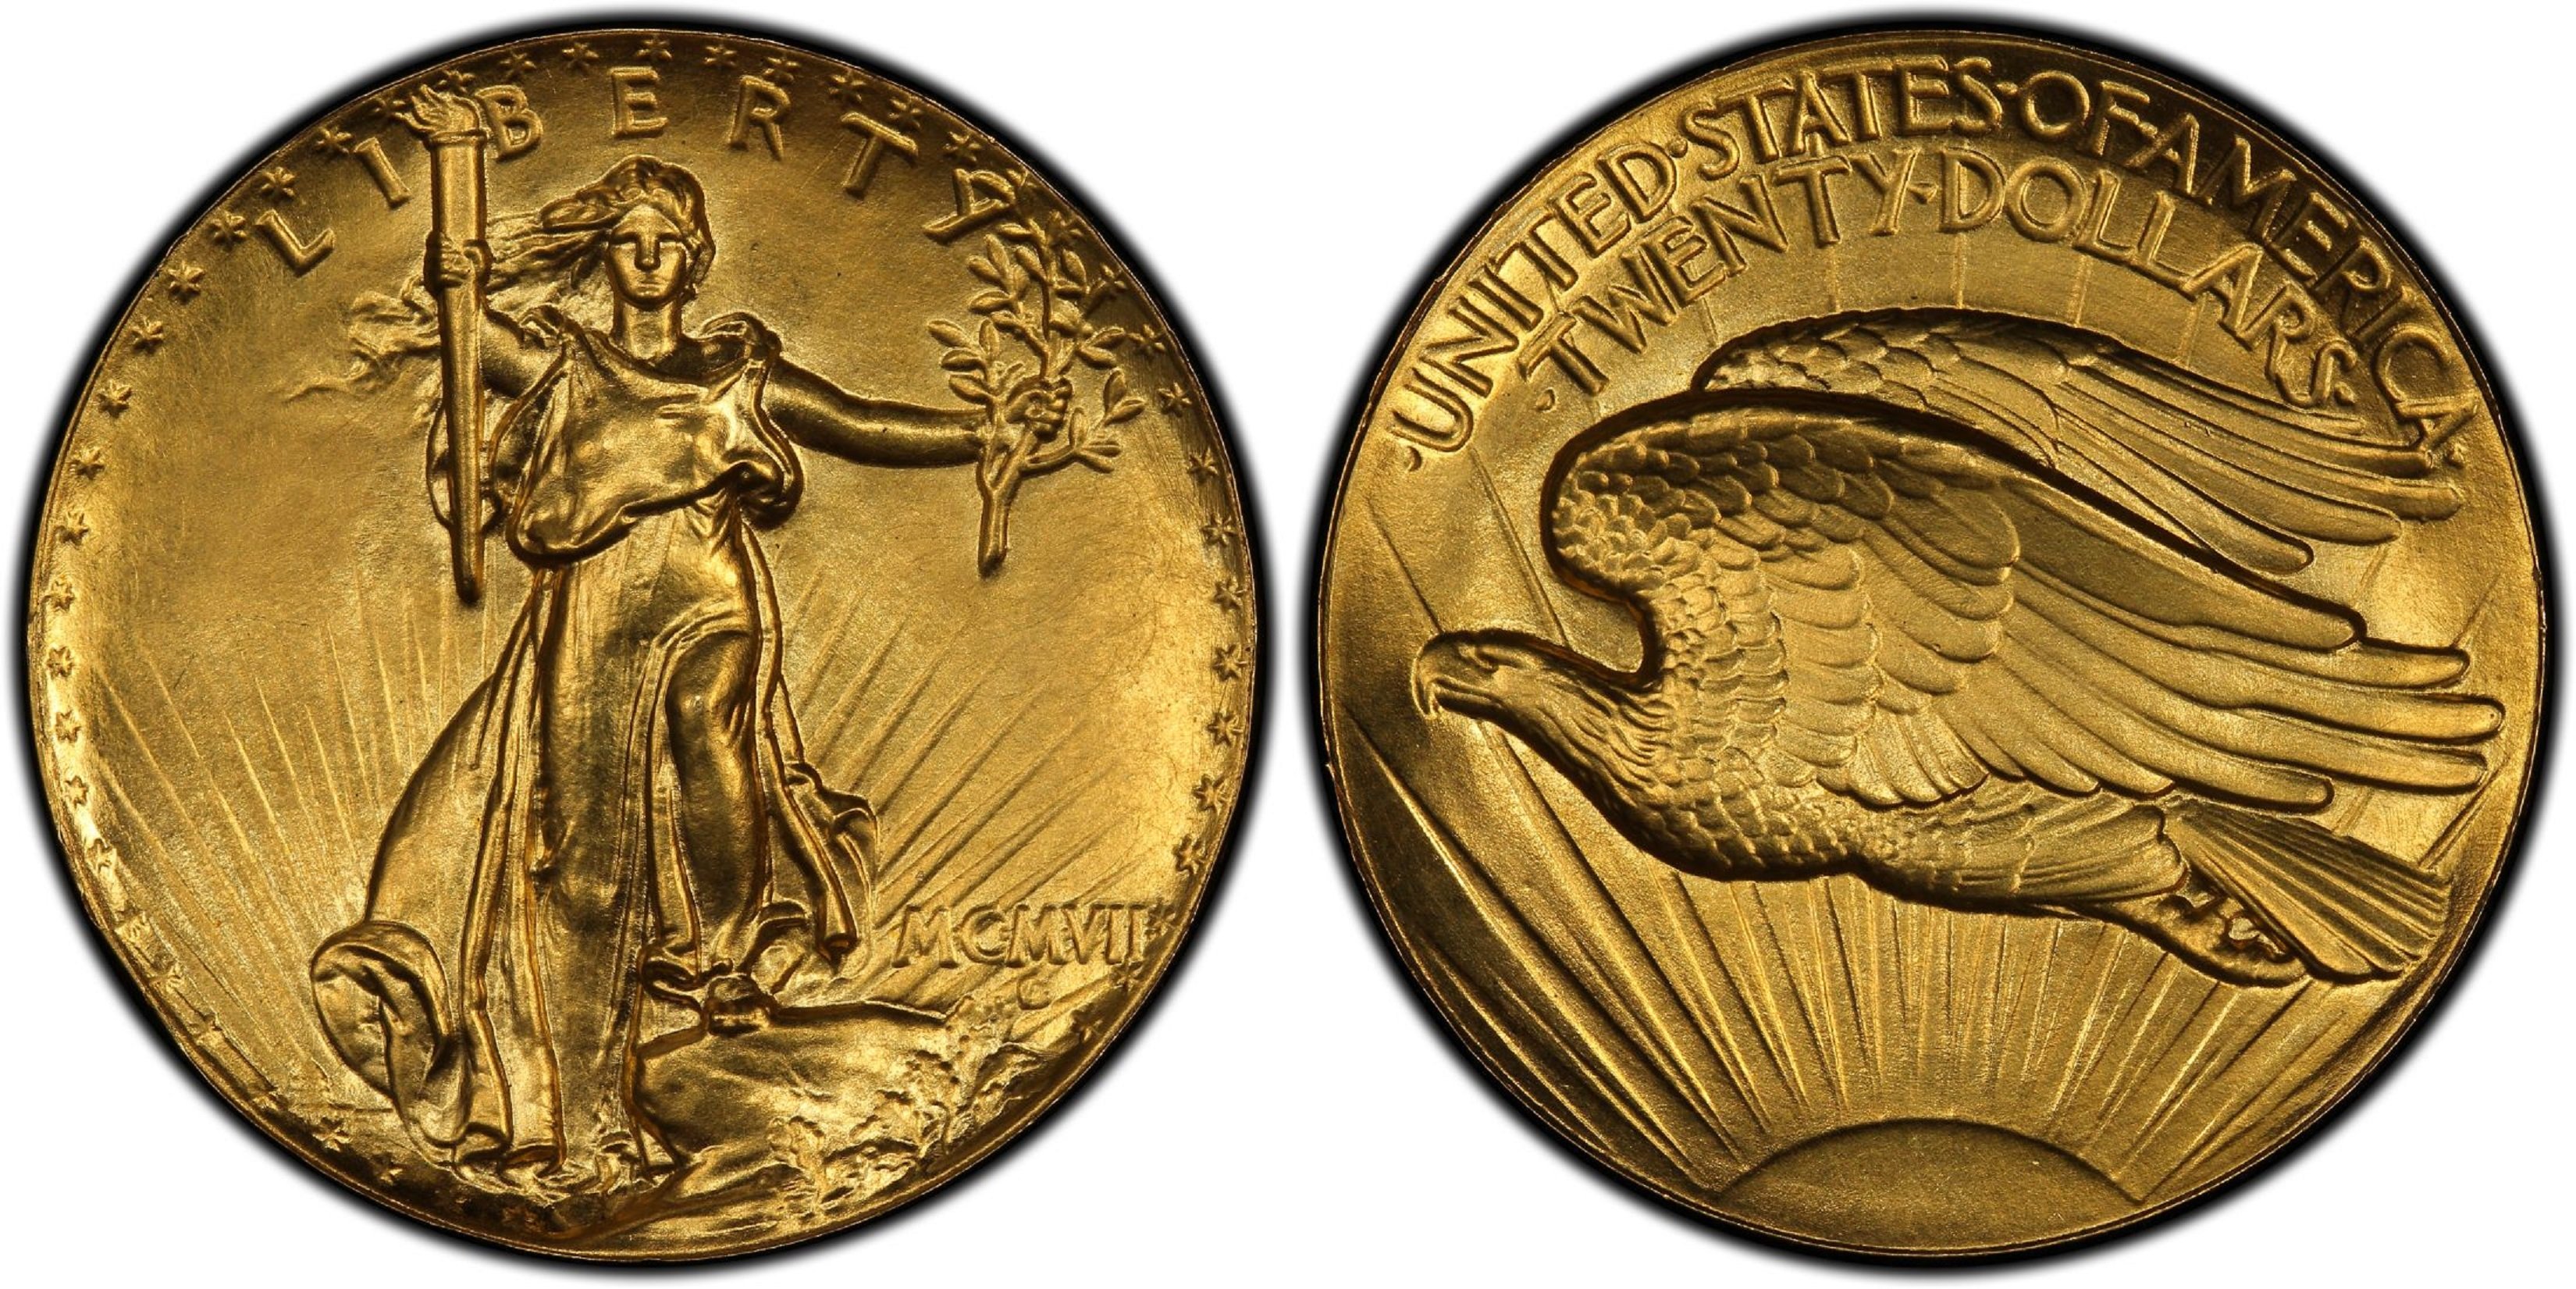 1907 Ultra High Relief double eagle